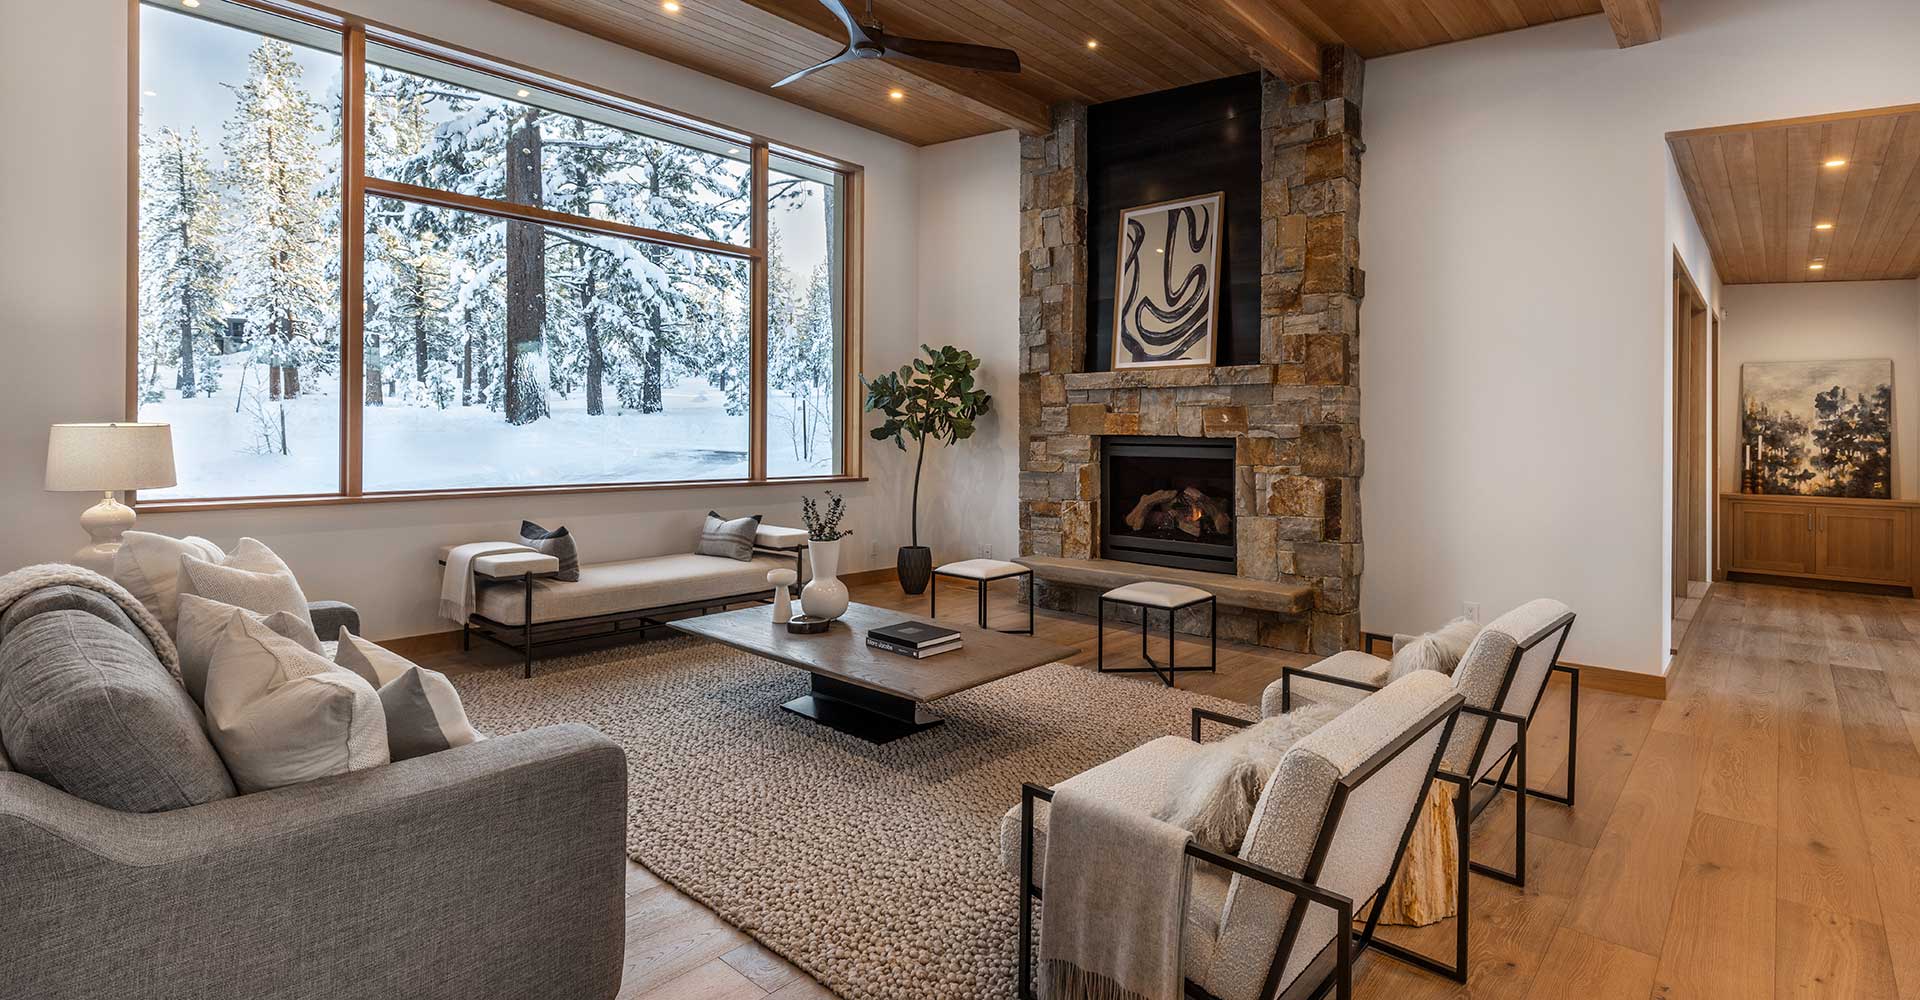 luxury Lahontan Home 401 for sale at 705 John McKinney, Truckee, Ca.